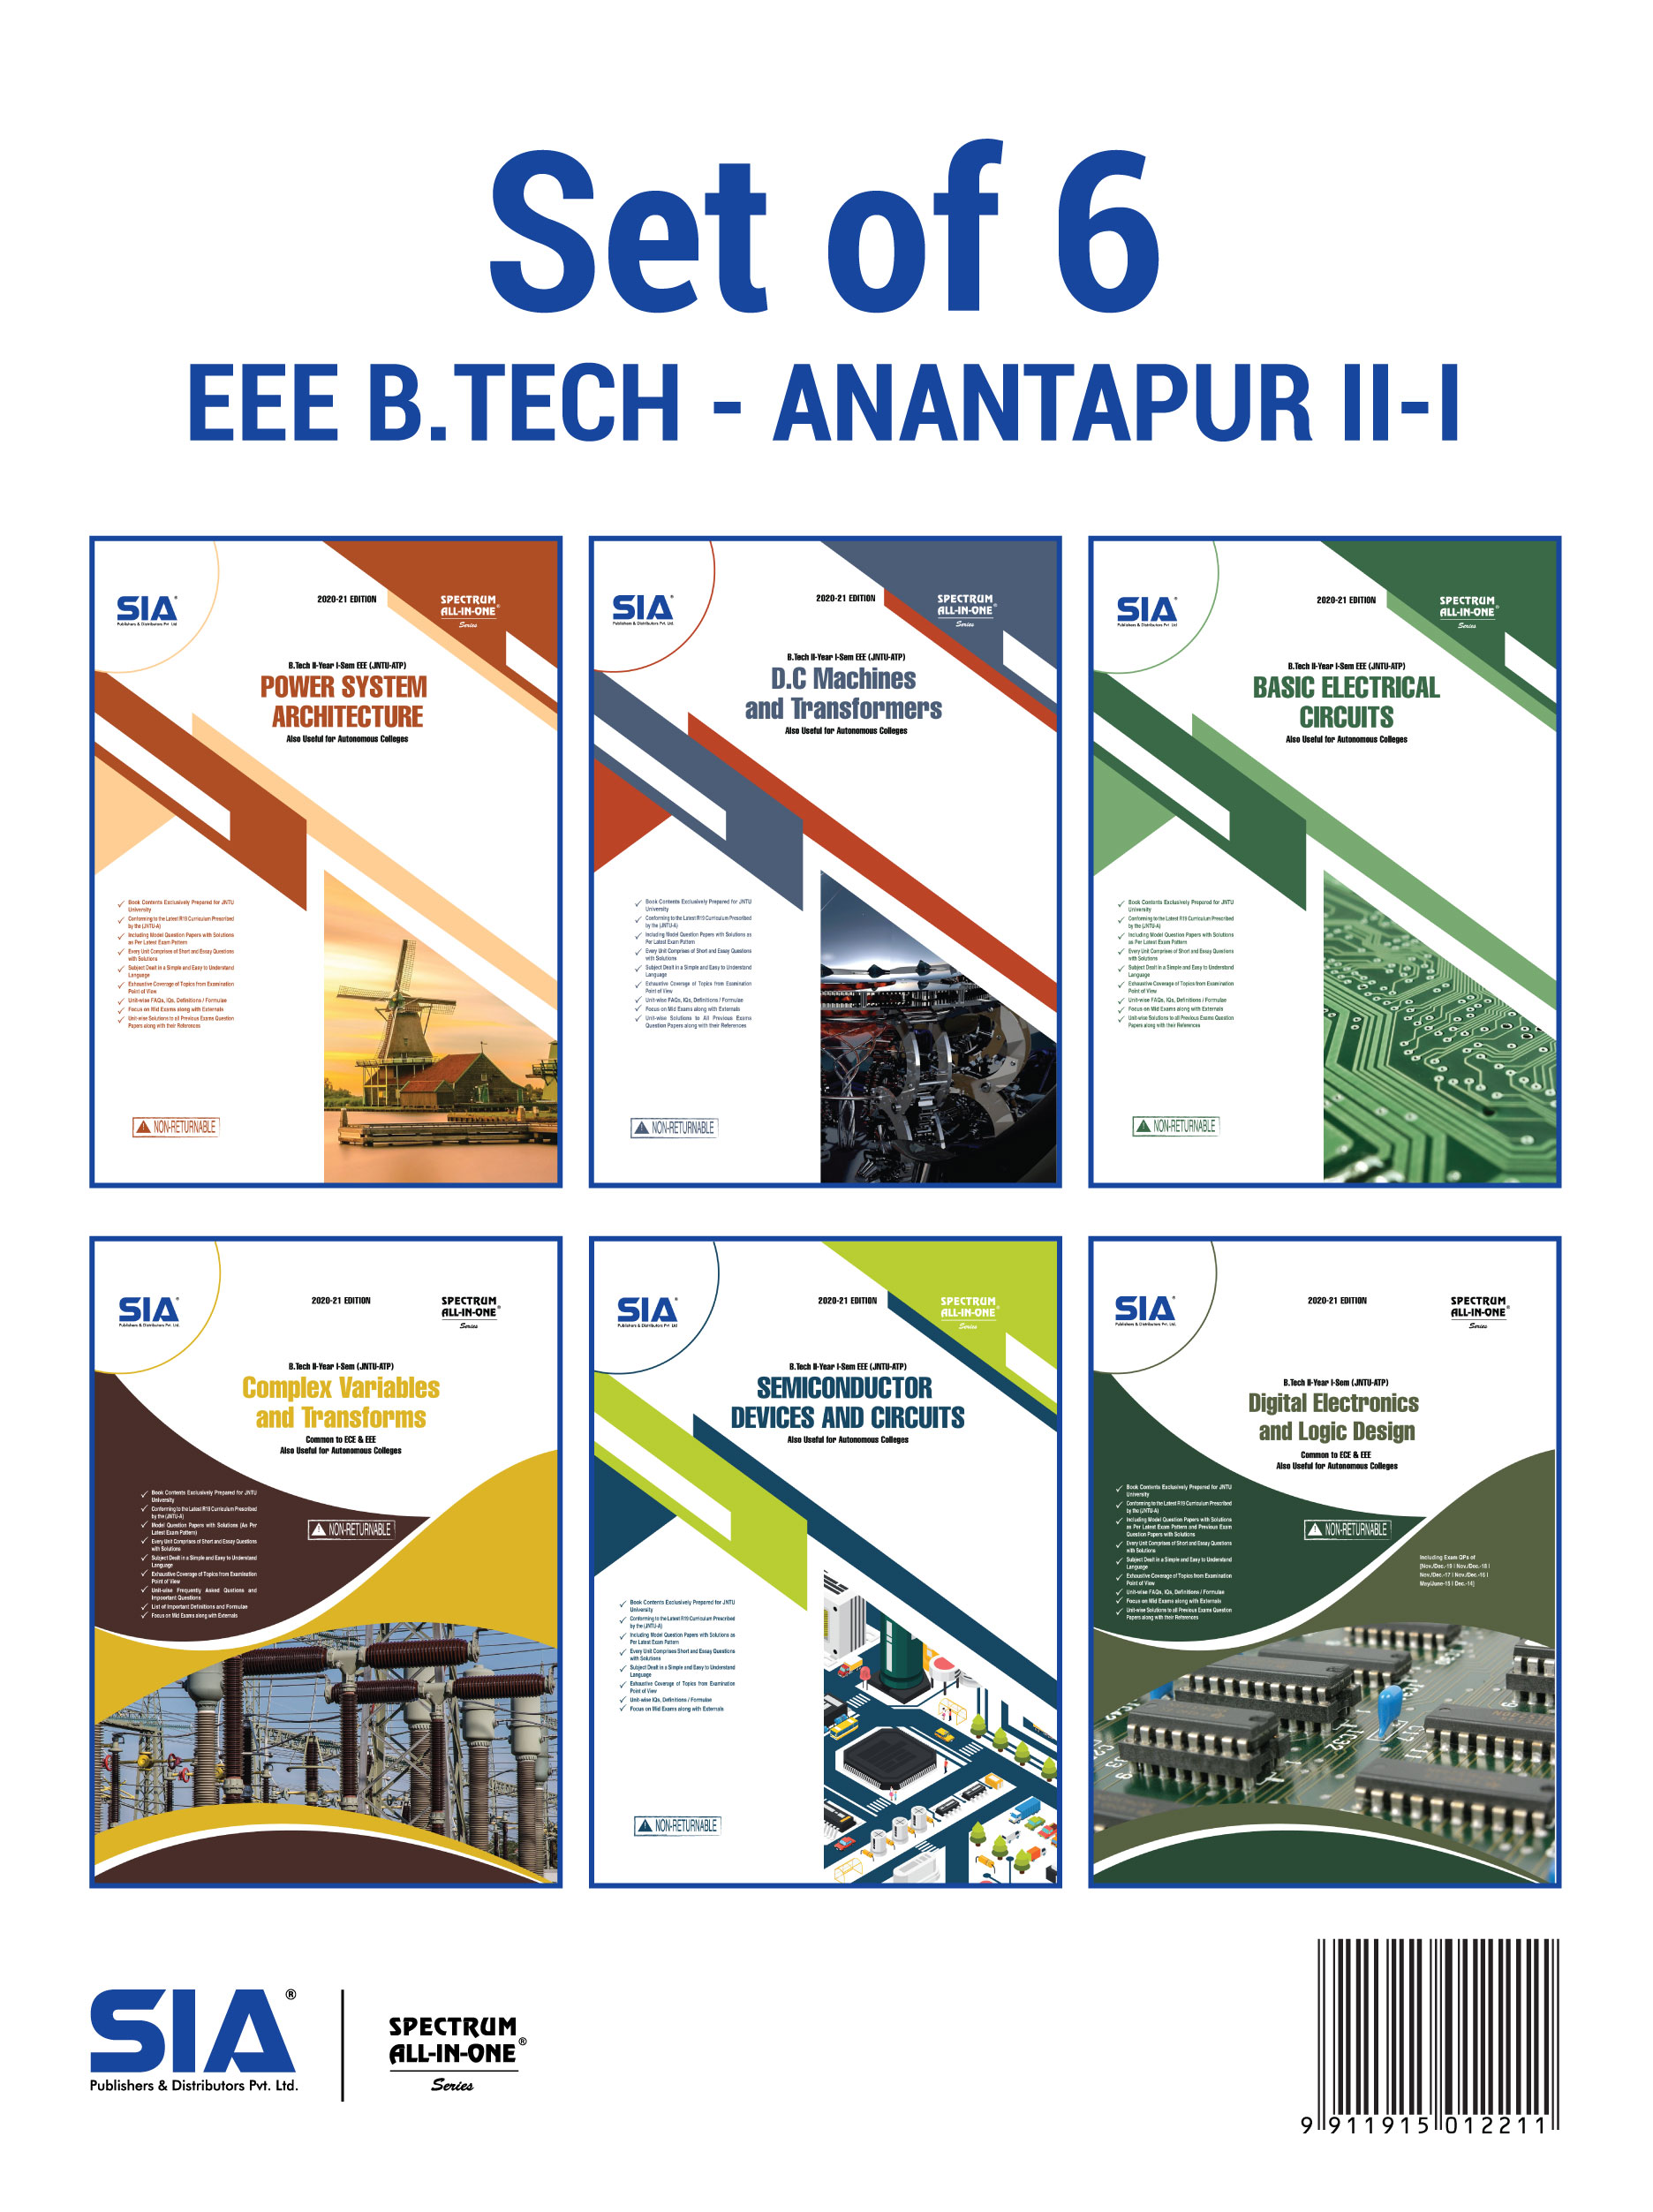 engineering btech jntu anantapur electricals and electronics